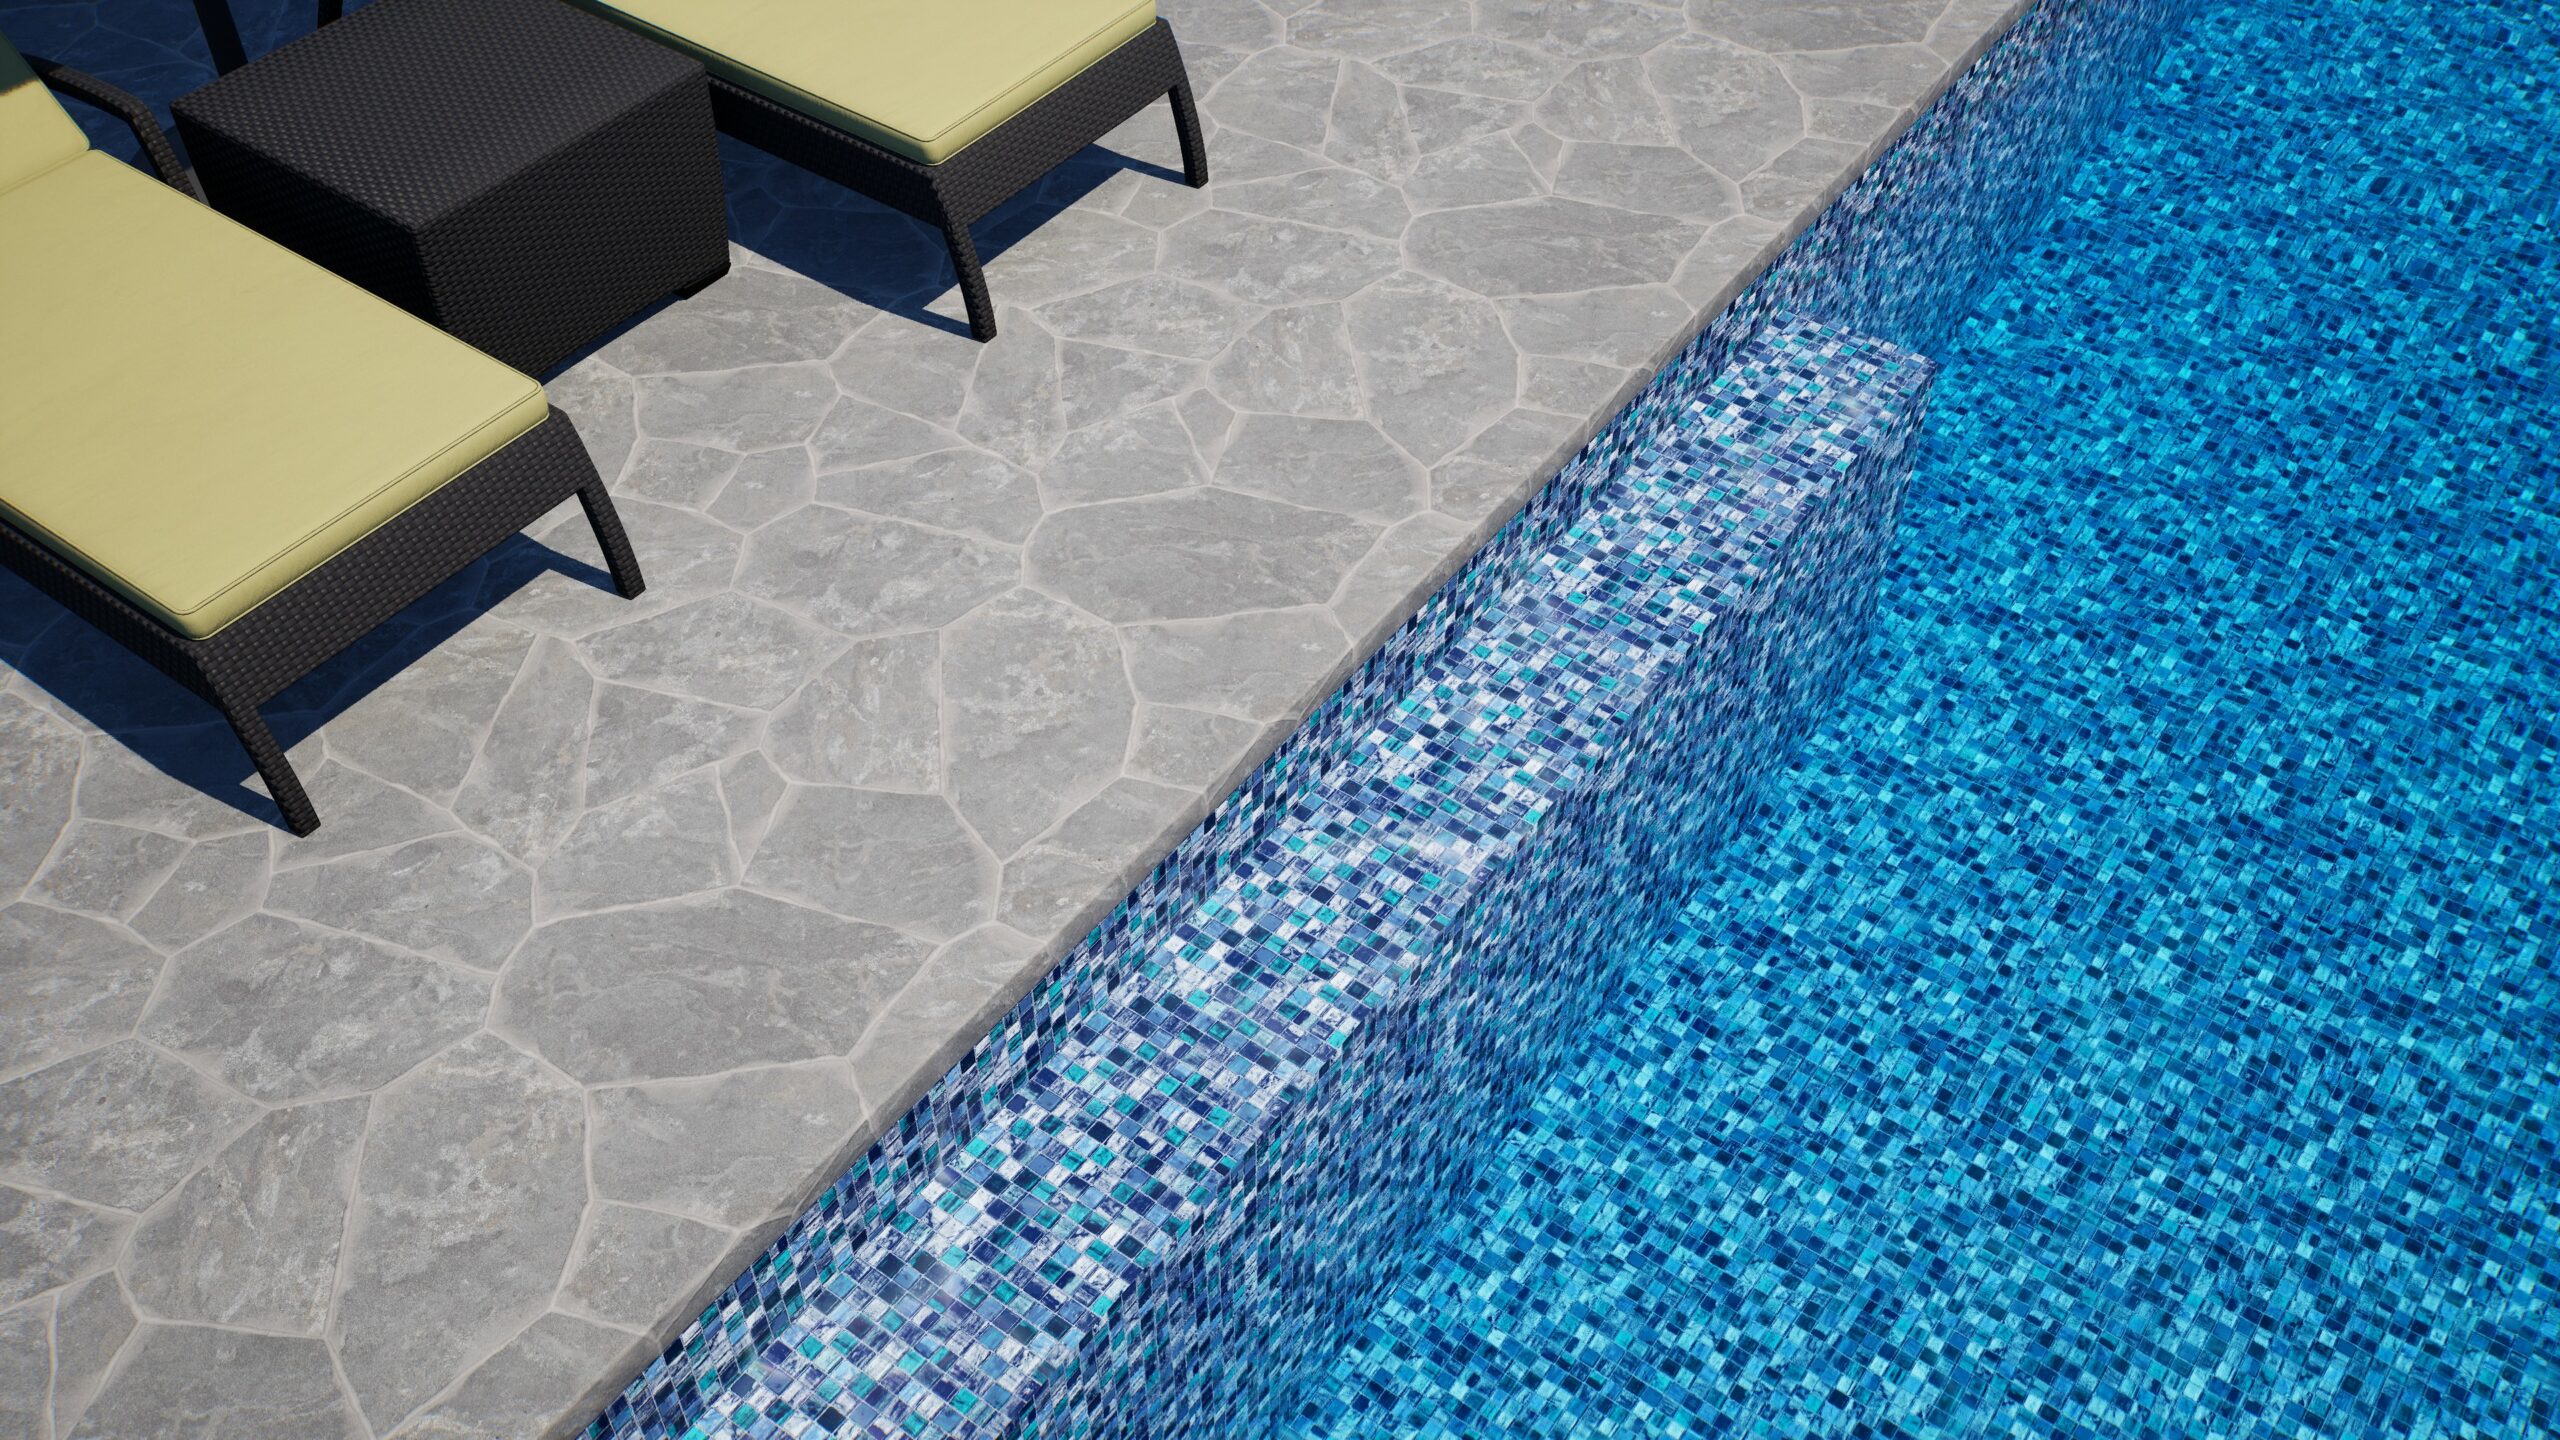 Innovating vinyl pool liners: New technologies create beautiful and functional designs